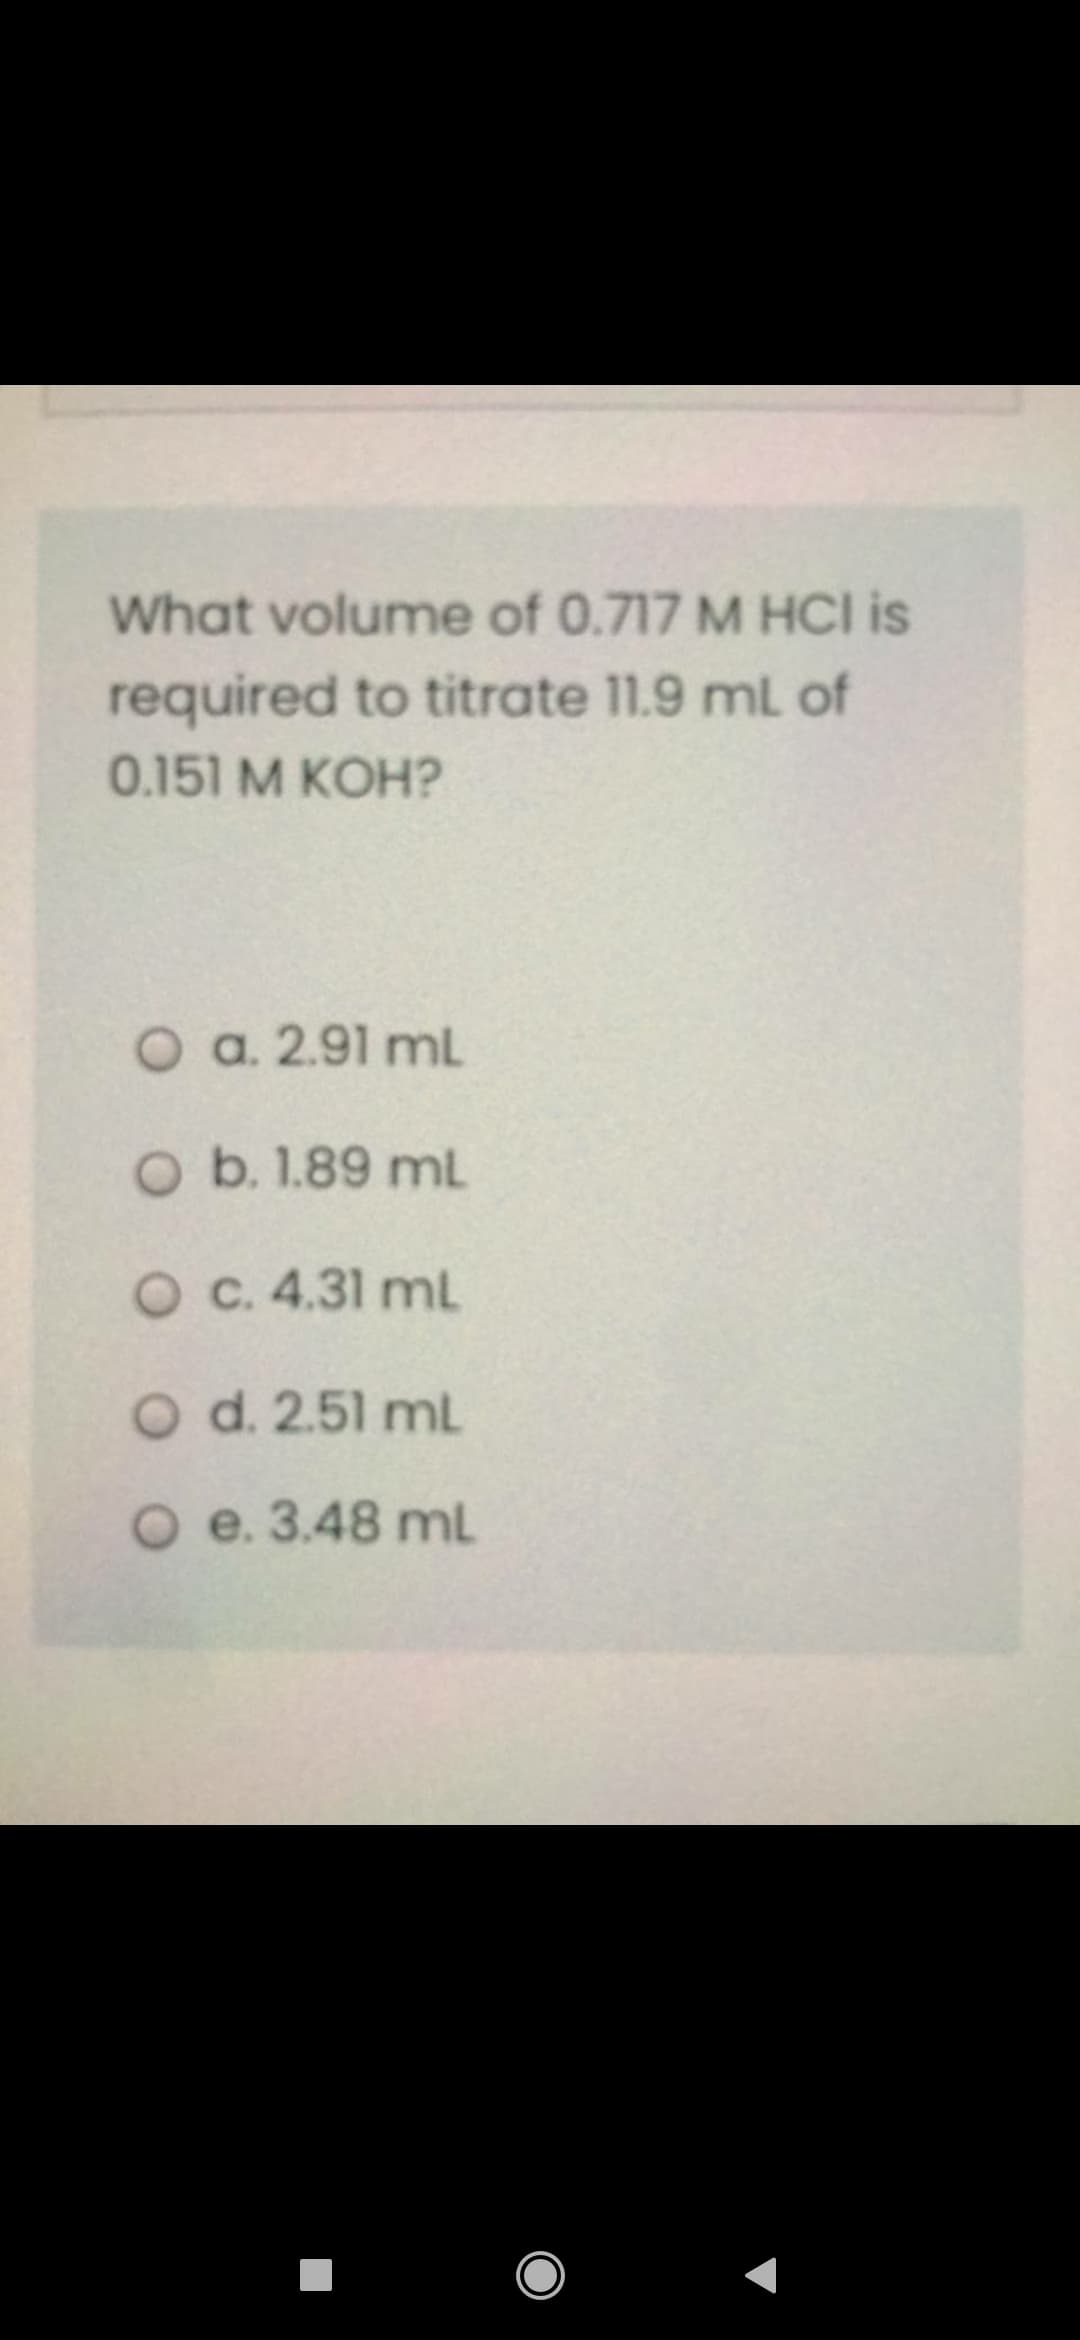 What volume of 0.717 M HCI is
required to titrate 11.9 ml of
0.151 M KOH?
O a. 2.91 mL
O b. 1.89 mL
O C. 4.31 mL
O d. 2.51 mL
O e. 3.48 mL
